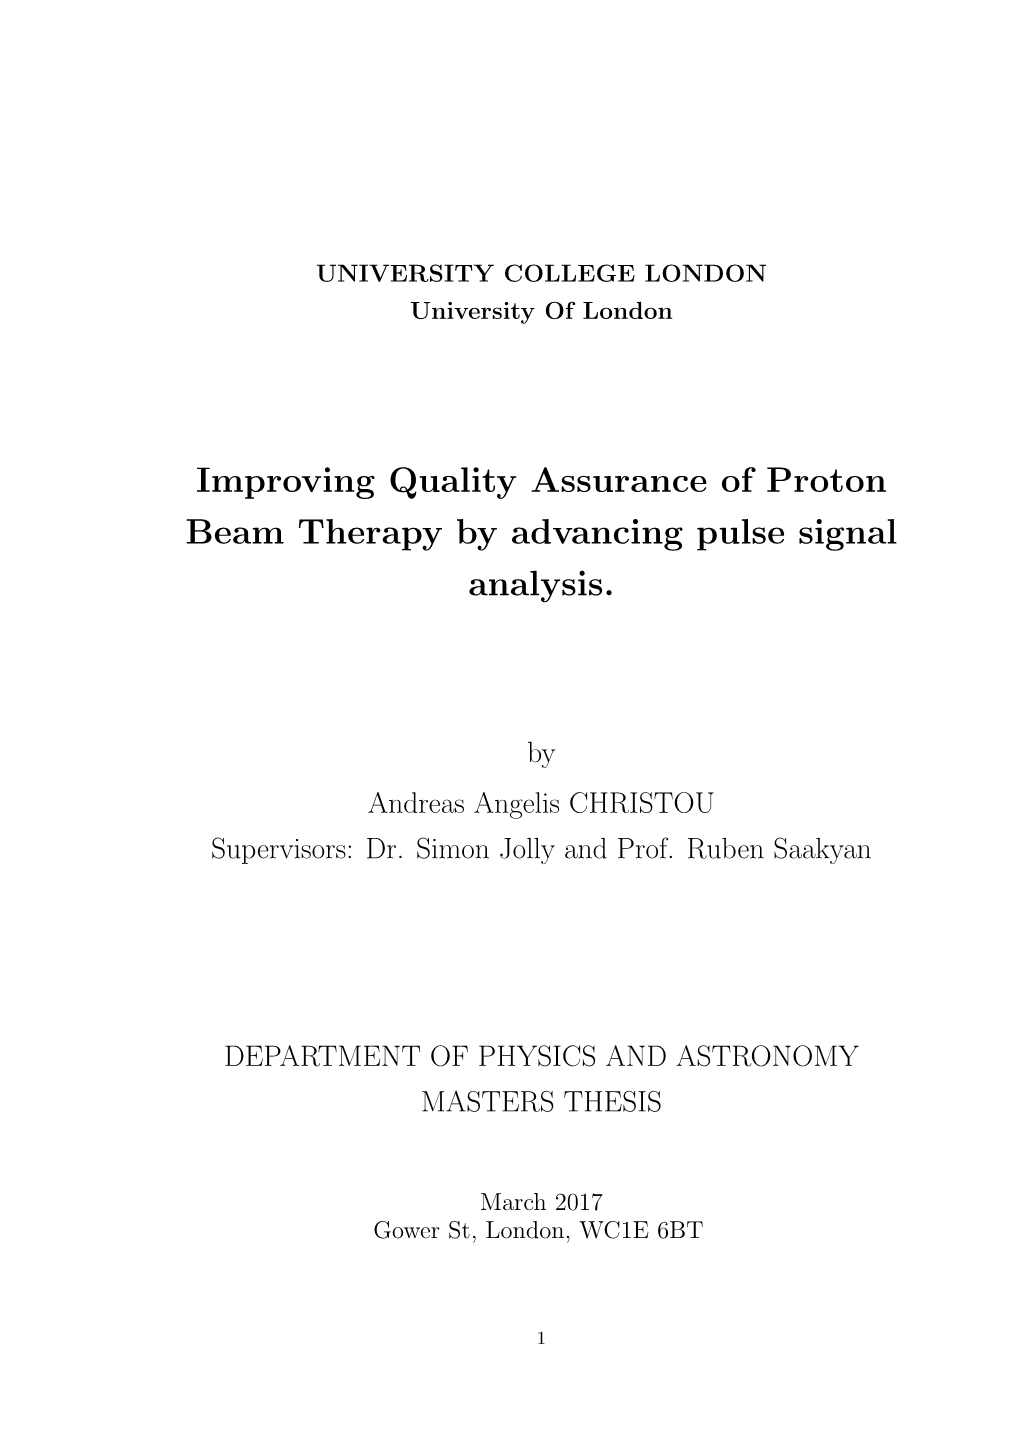 Improving Quality Assurance of Proton Beam Therapy by Advancing Pulse Signal Analysis